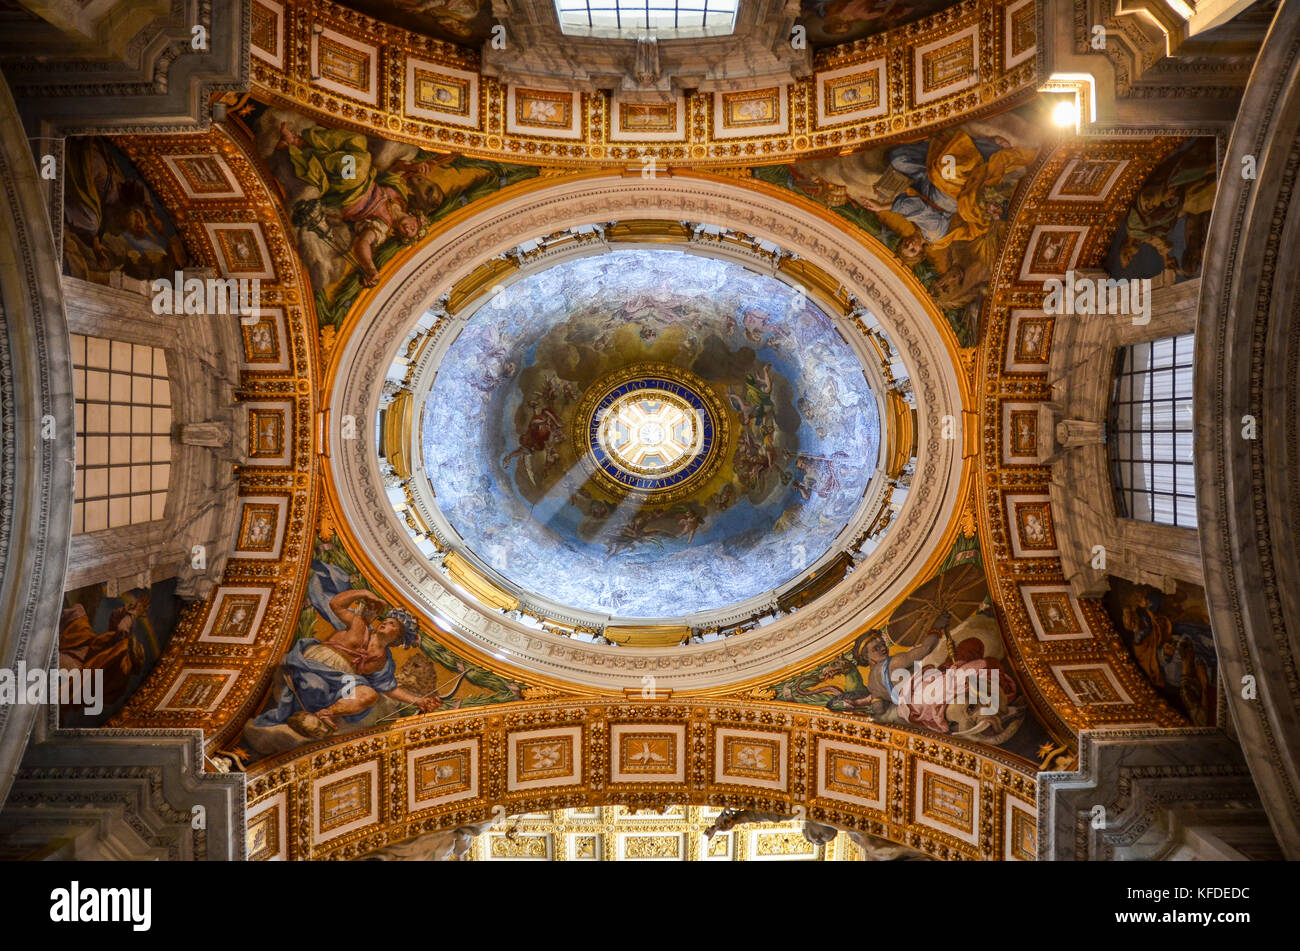 St Peter's Basilica in Rome, Italian Renaissance architecture, and UNESCO world heritage site. Interior views, of the domed ceiling with sacred artwor Stock Photo